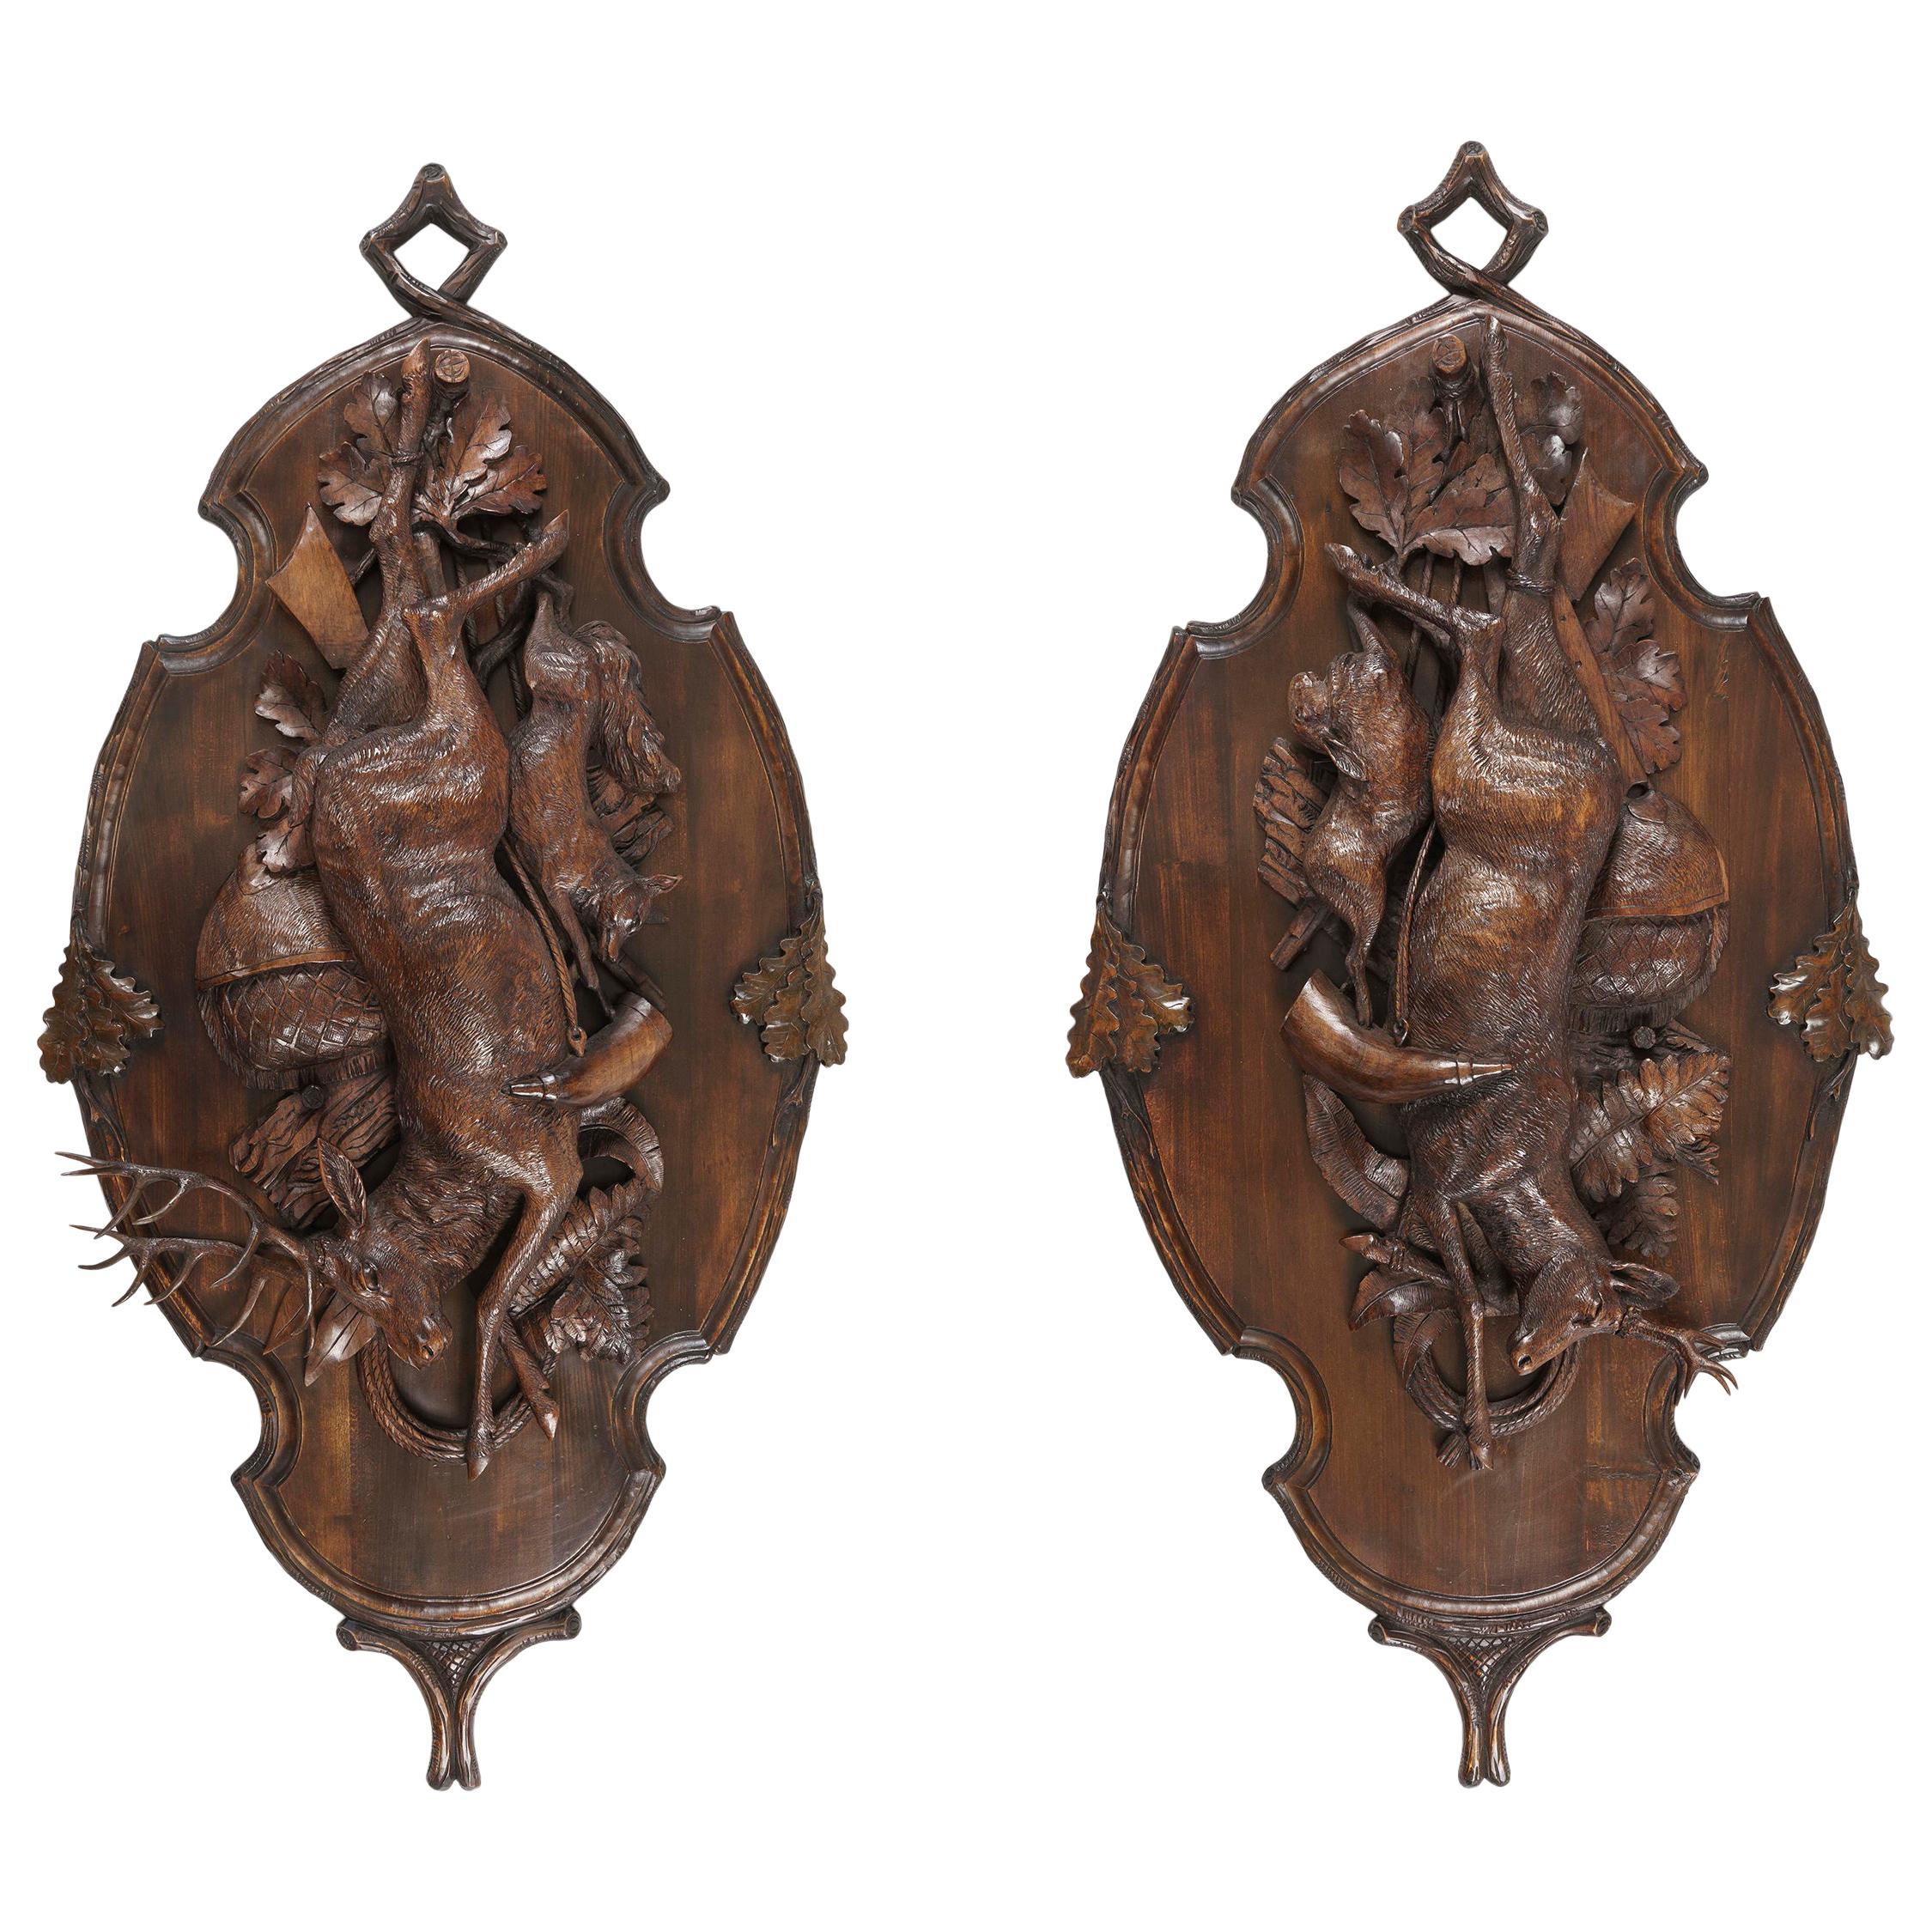 Large Pair of Carved Black Forest Trophy Plaques depicting Deer, a Hare, and Fox